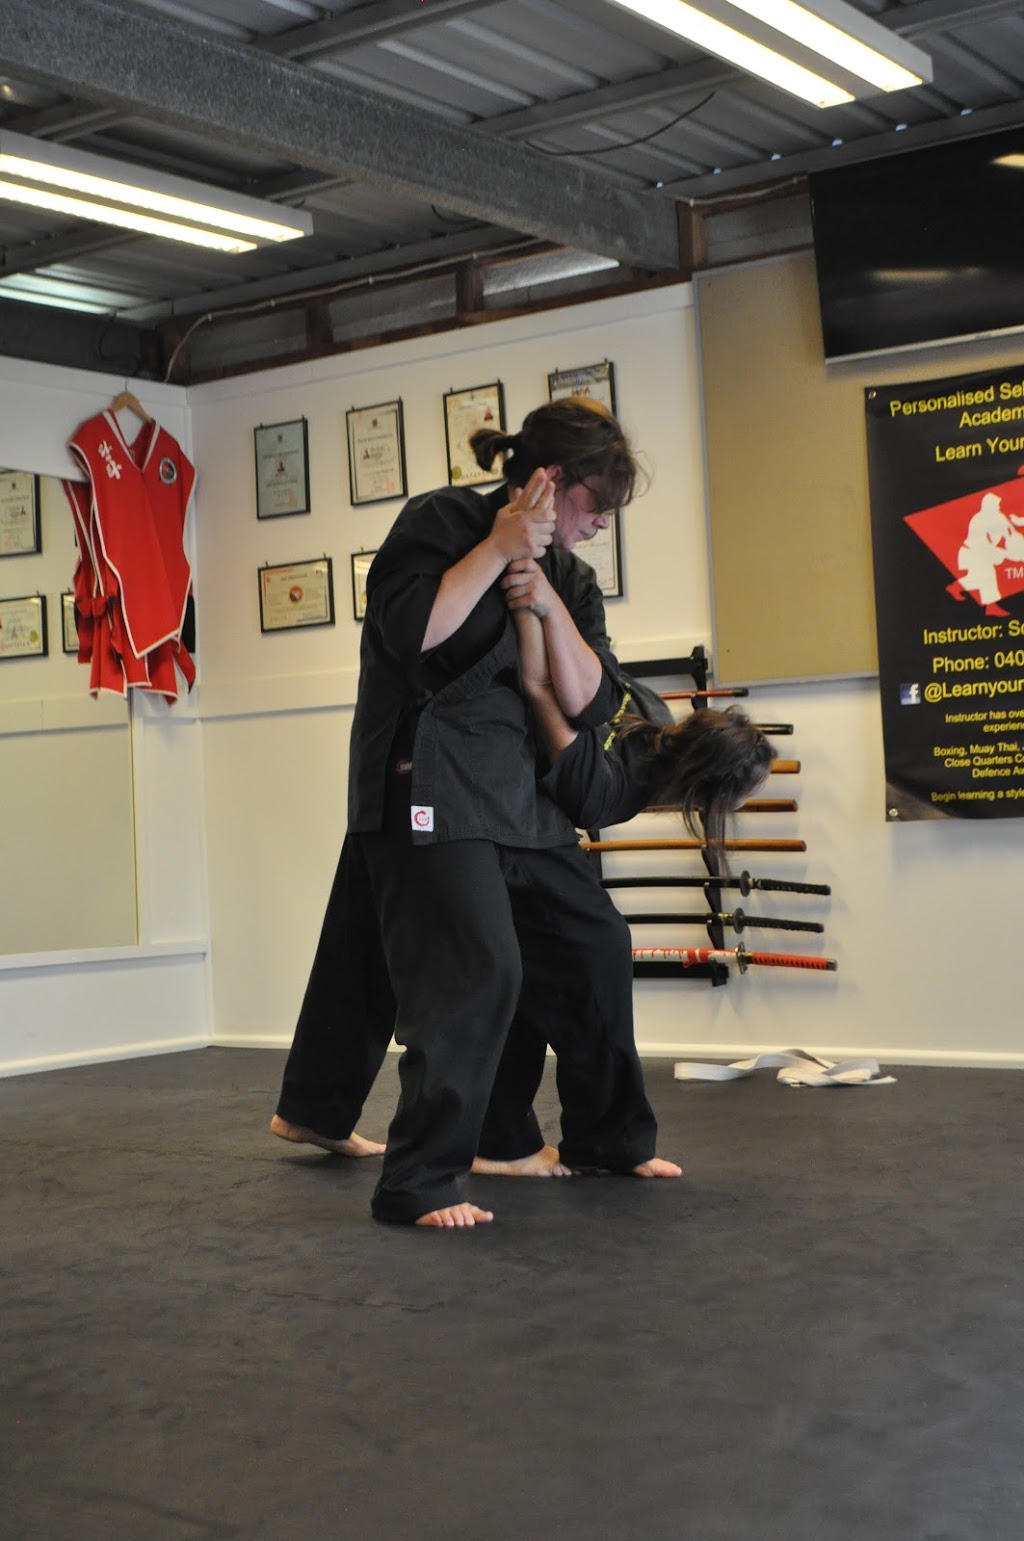 Personalised Self Defence Academy | health | 9 Youll St, Wallsend NSW 2287, Australia | 0404842027 OR +61 404 842 027